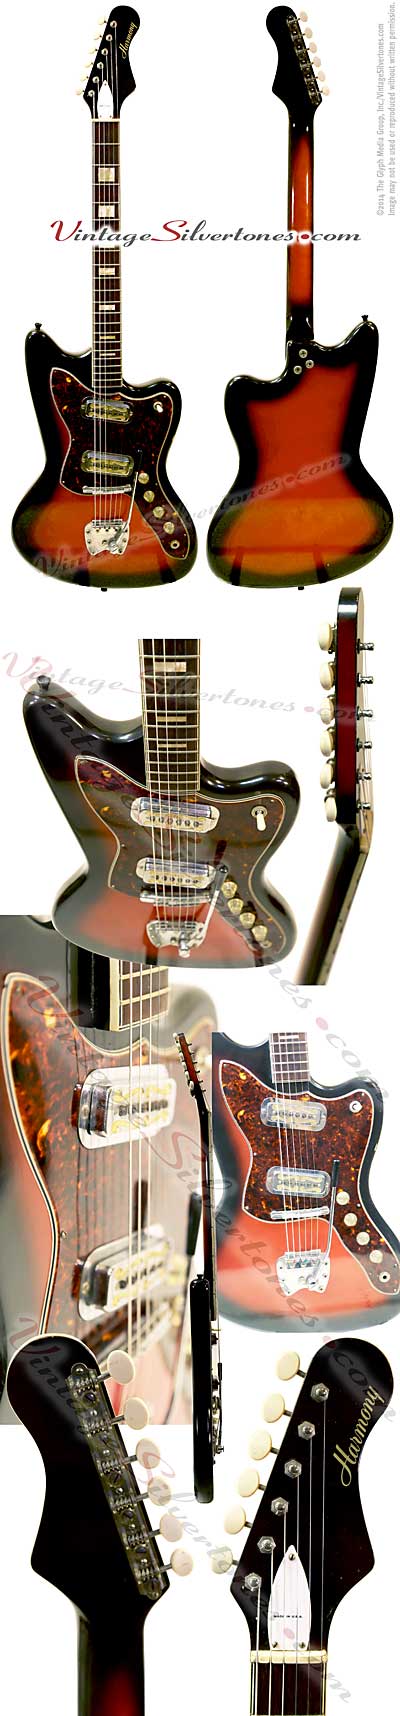 Harmony H19 Silhouette, 2 single coil pickup electric guitar solid body Cherry Redburst, made in Chicago Harmony Holy Grail model circa 1965